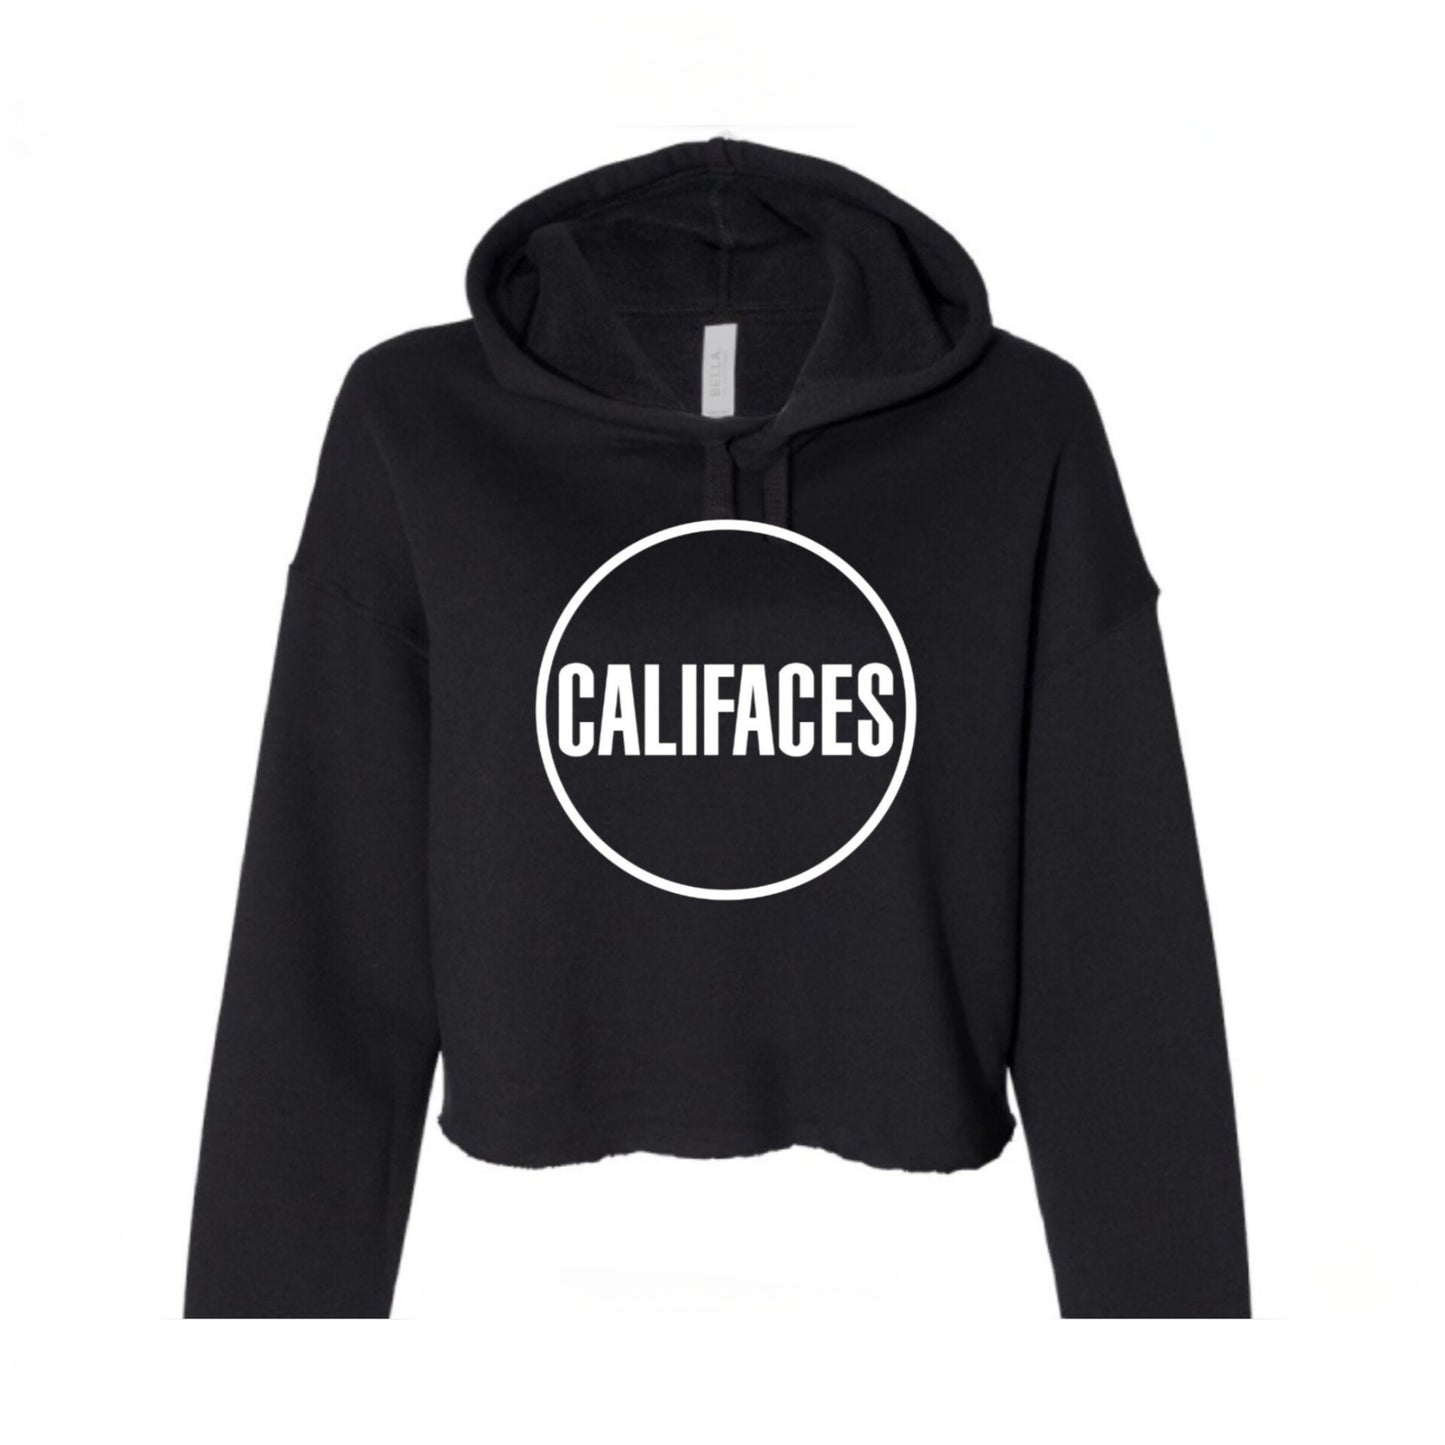 CaliFaces Women's Cropped Hoodie